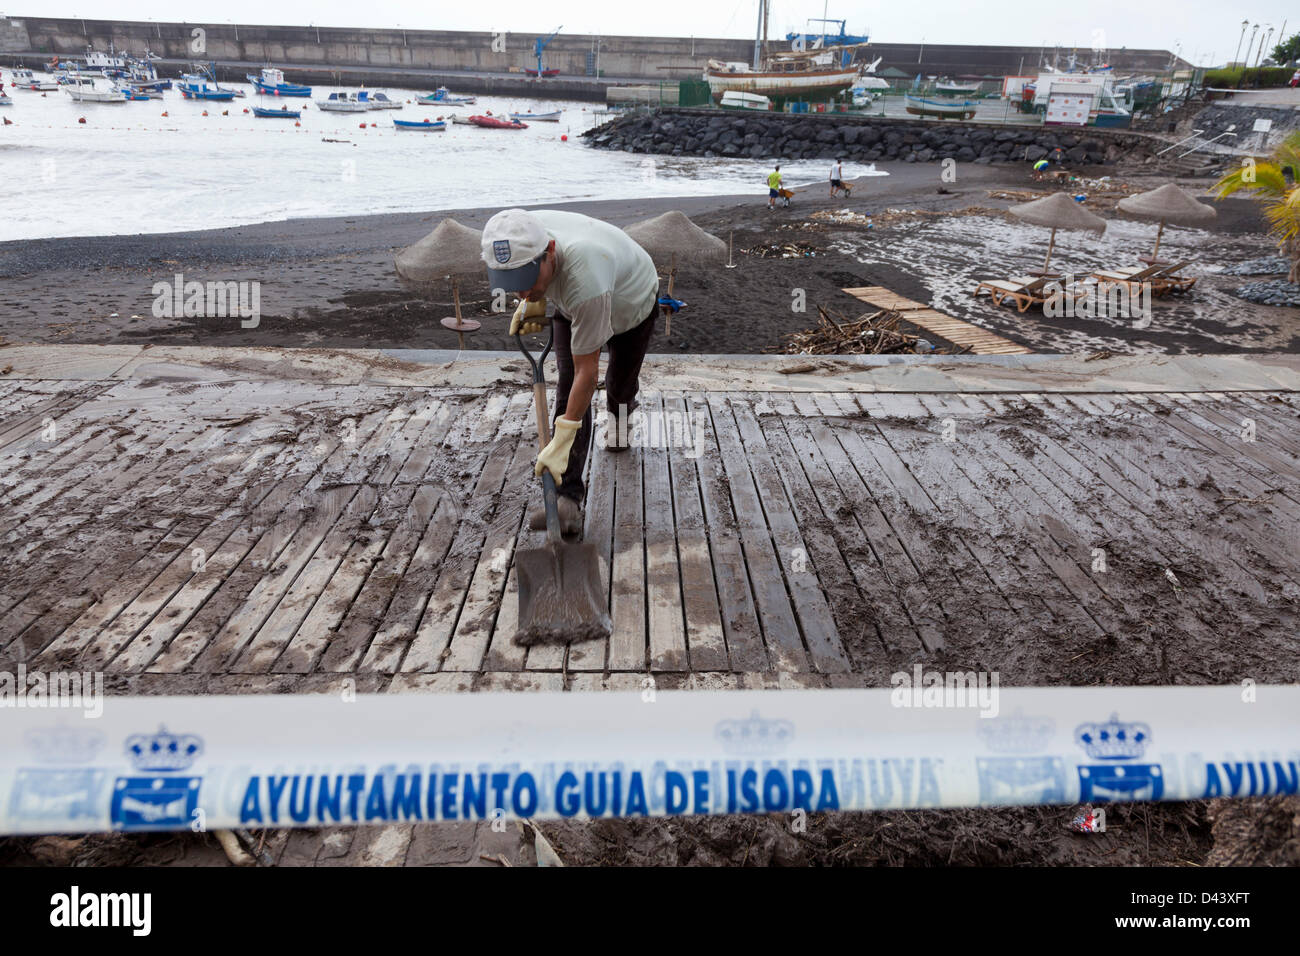 Cleaning up after storm damage in Playa de San Juan, Guia de Isora, Tenerife, Canary Islands. Winds of up to 100 km/hour and extremely high rainfall caused flooding bringing lots of mud and other debris on to the beach promenade and walkways of San Juan. Stock Photo